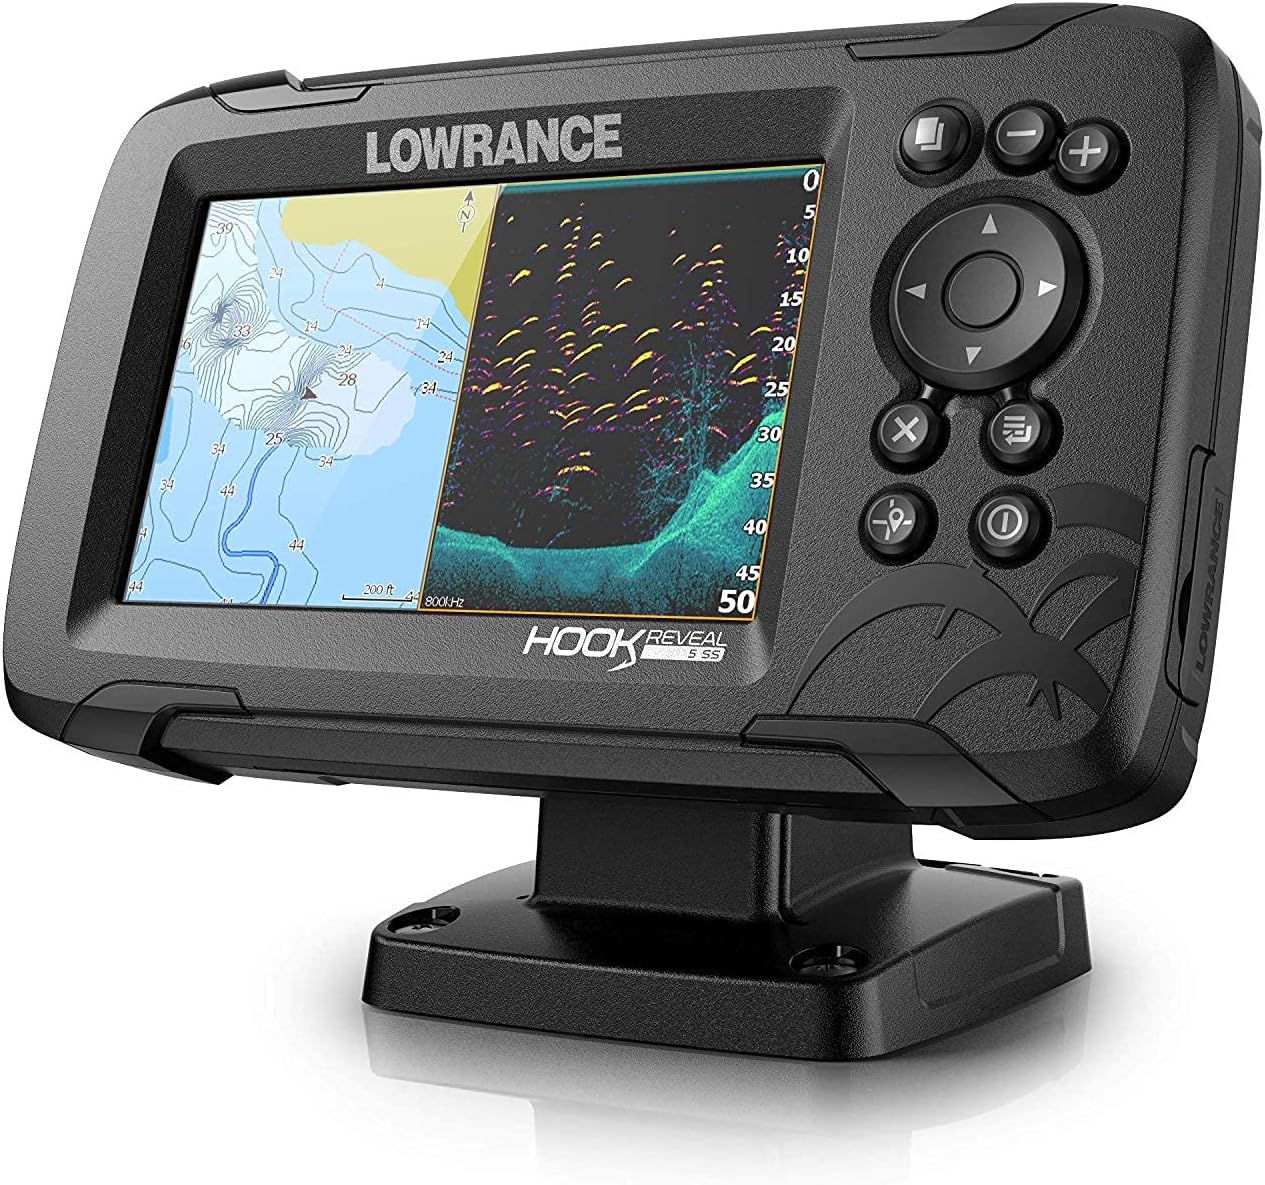 Lowrance Hook Reveal 5 Fish Finder - 5 Inch Screen with Transducer and C-MAP Preloaded Map Options (Renewed)